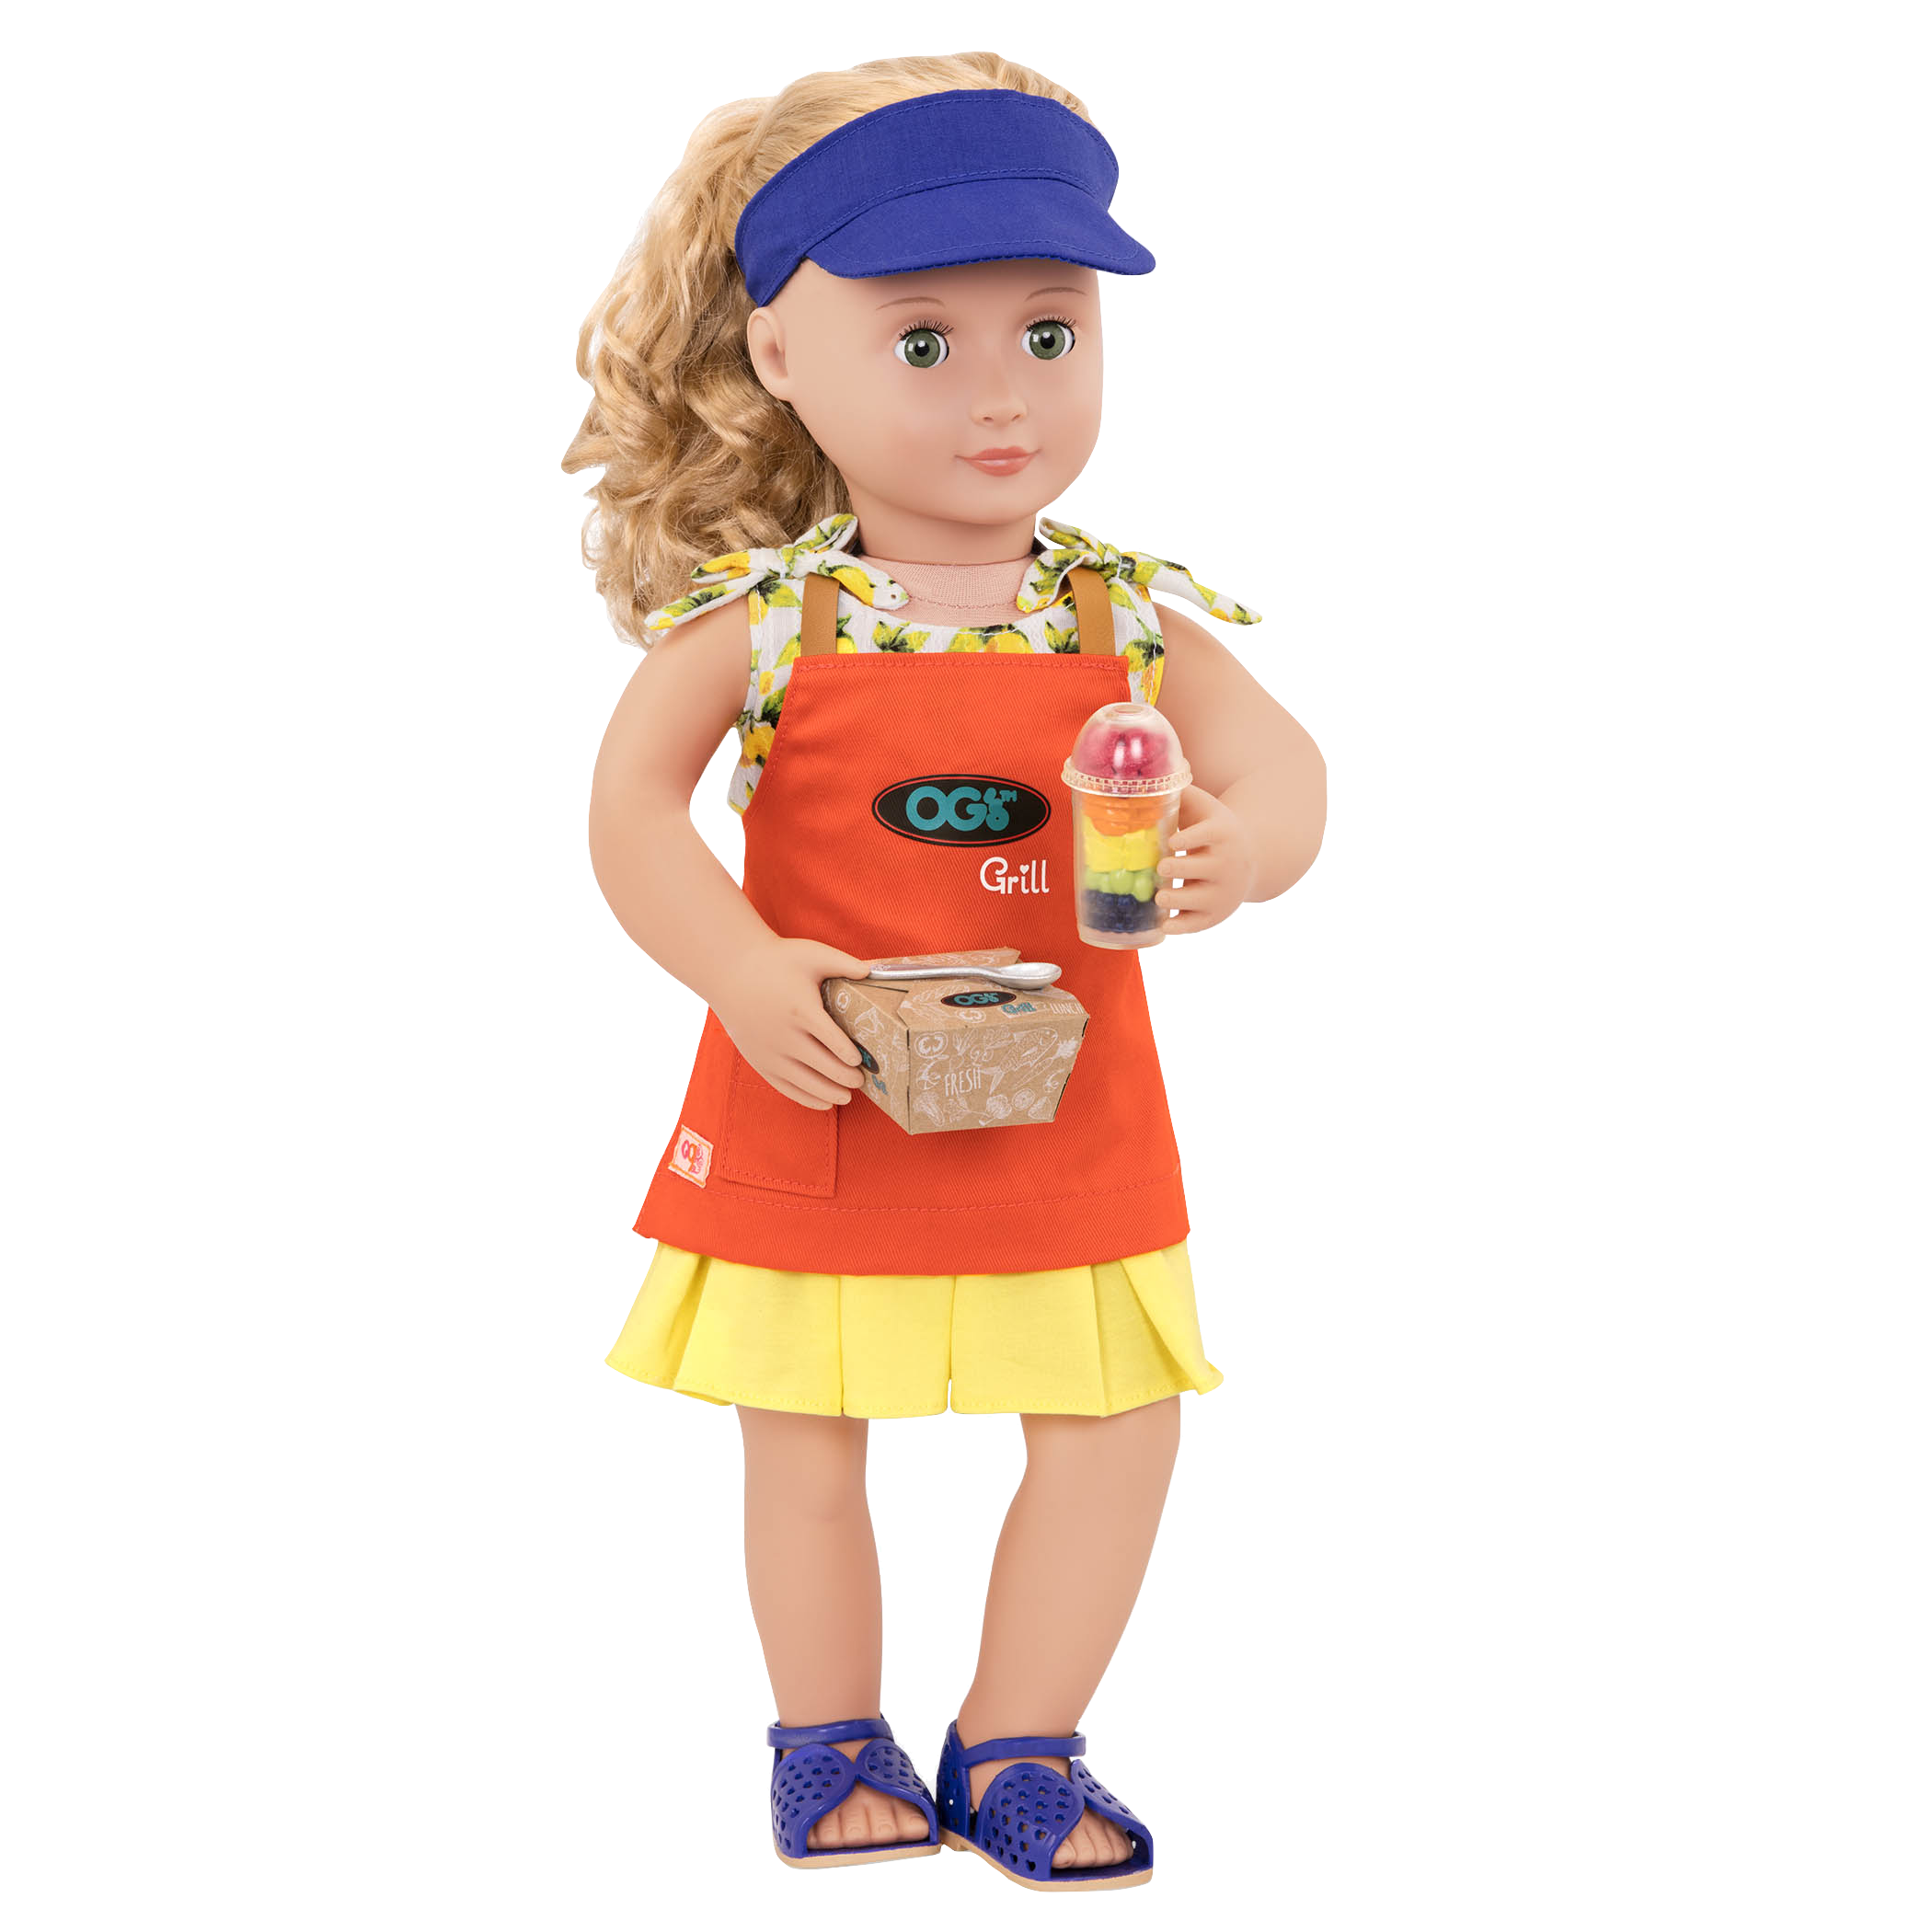 Jenny wearing clothes and holding Apron